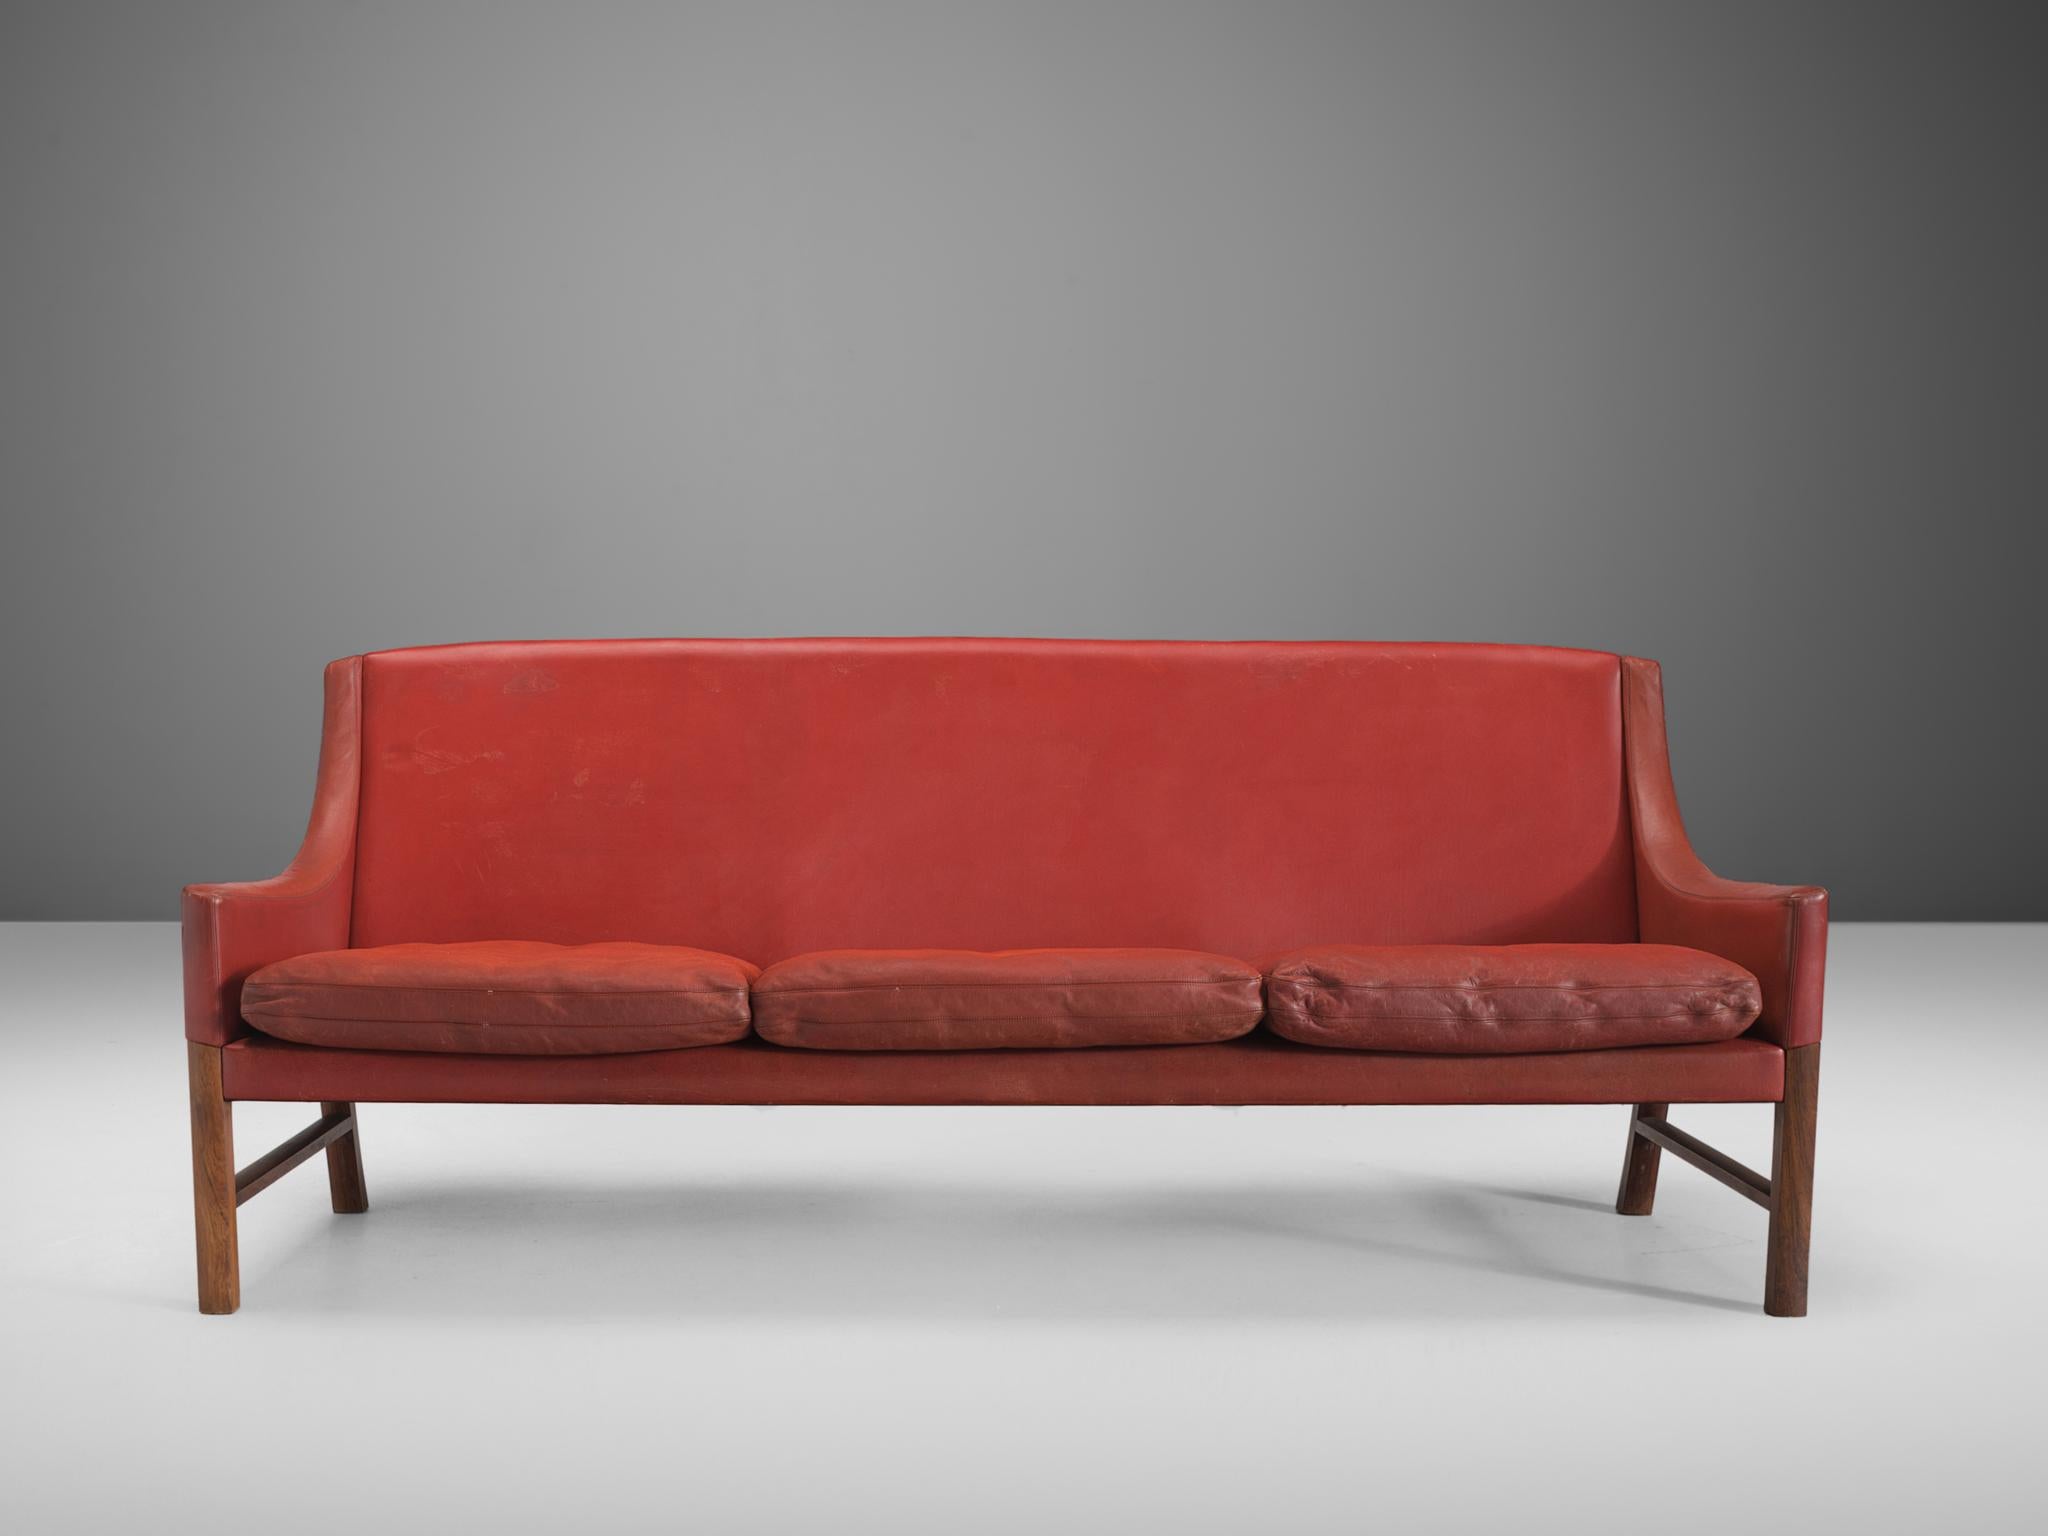 Settee, red leather, cocobolo, Sweden, 1950s.

This elegant settee shows traits of the Swedish designer Alf Svensson and Kai Kristiansen. The sofa has pointy armrests and a wonderful grained cocobolo frame. The cushions are comfortable and well